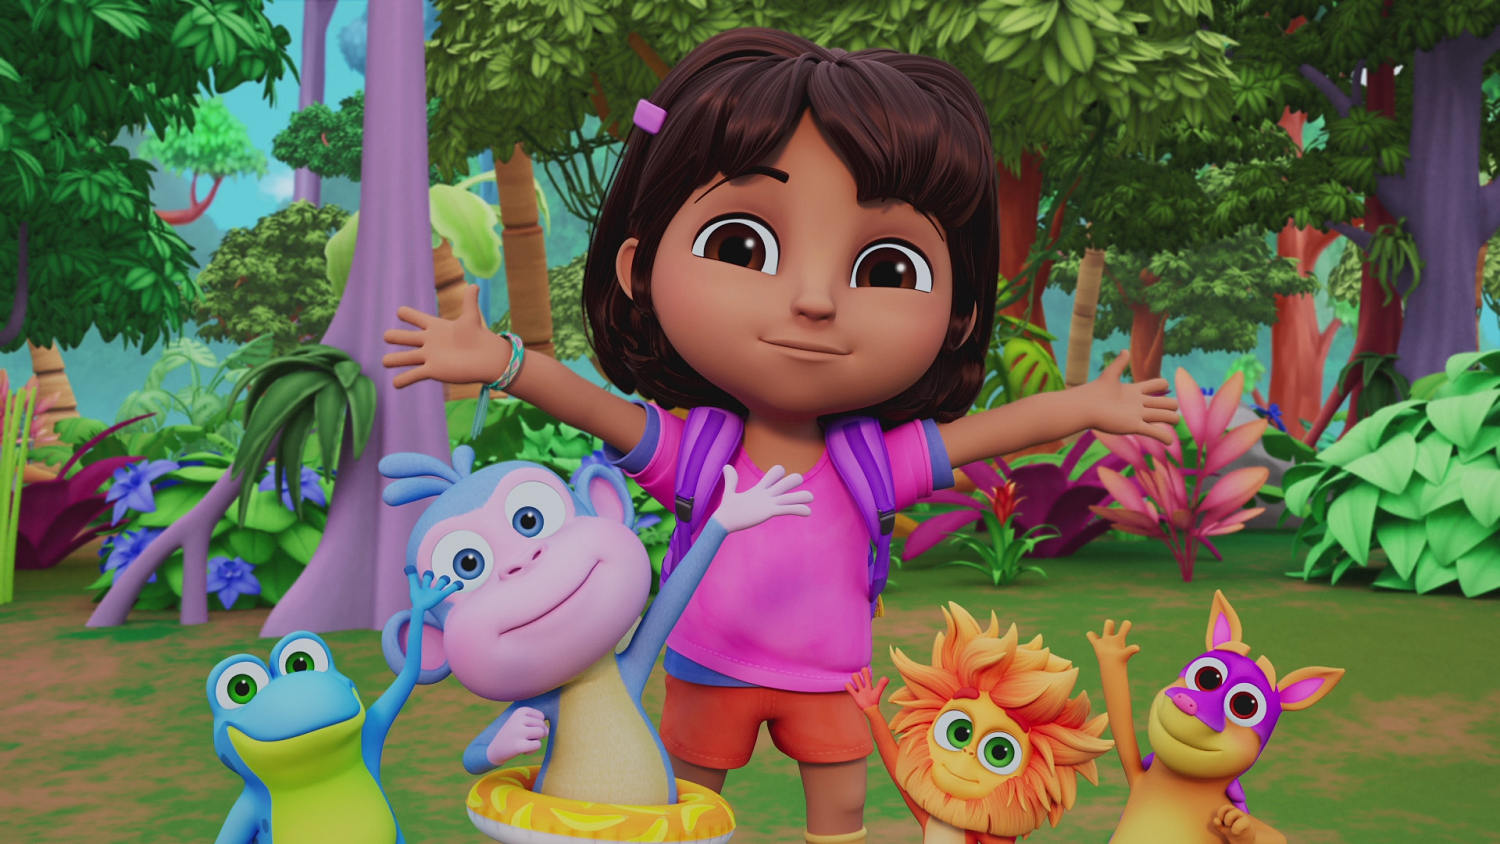 ‘Dora the Explorer’ takes kids on new — and bilingual — adventures